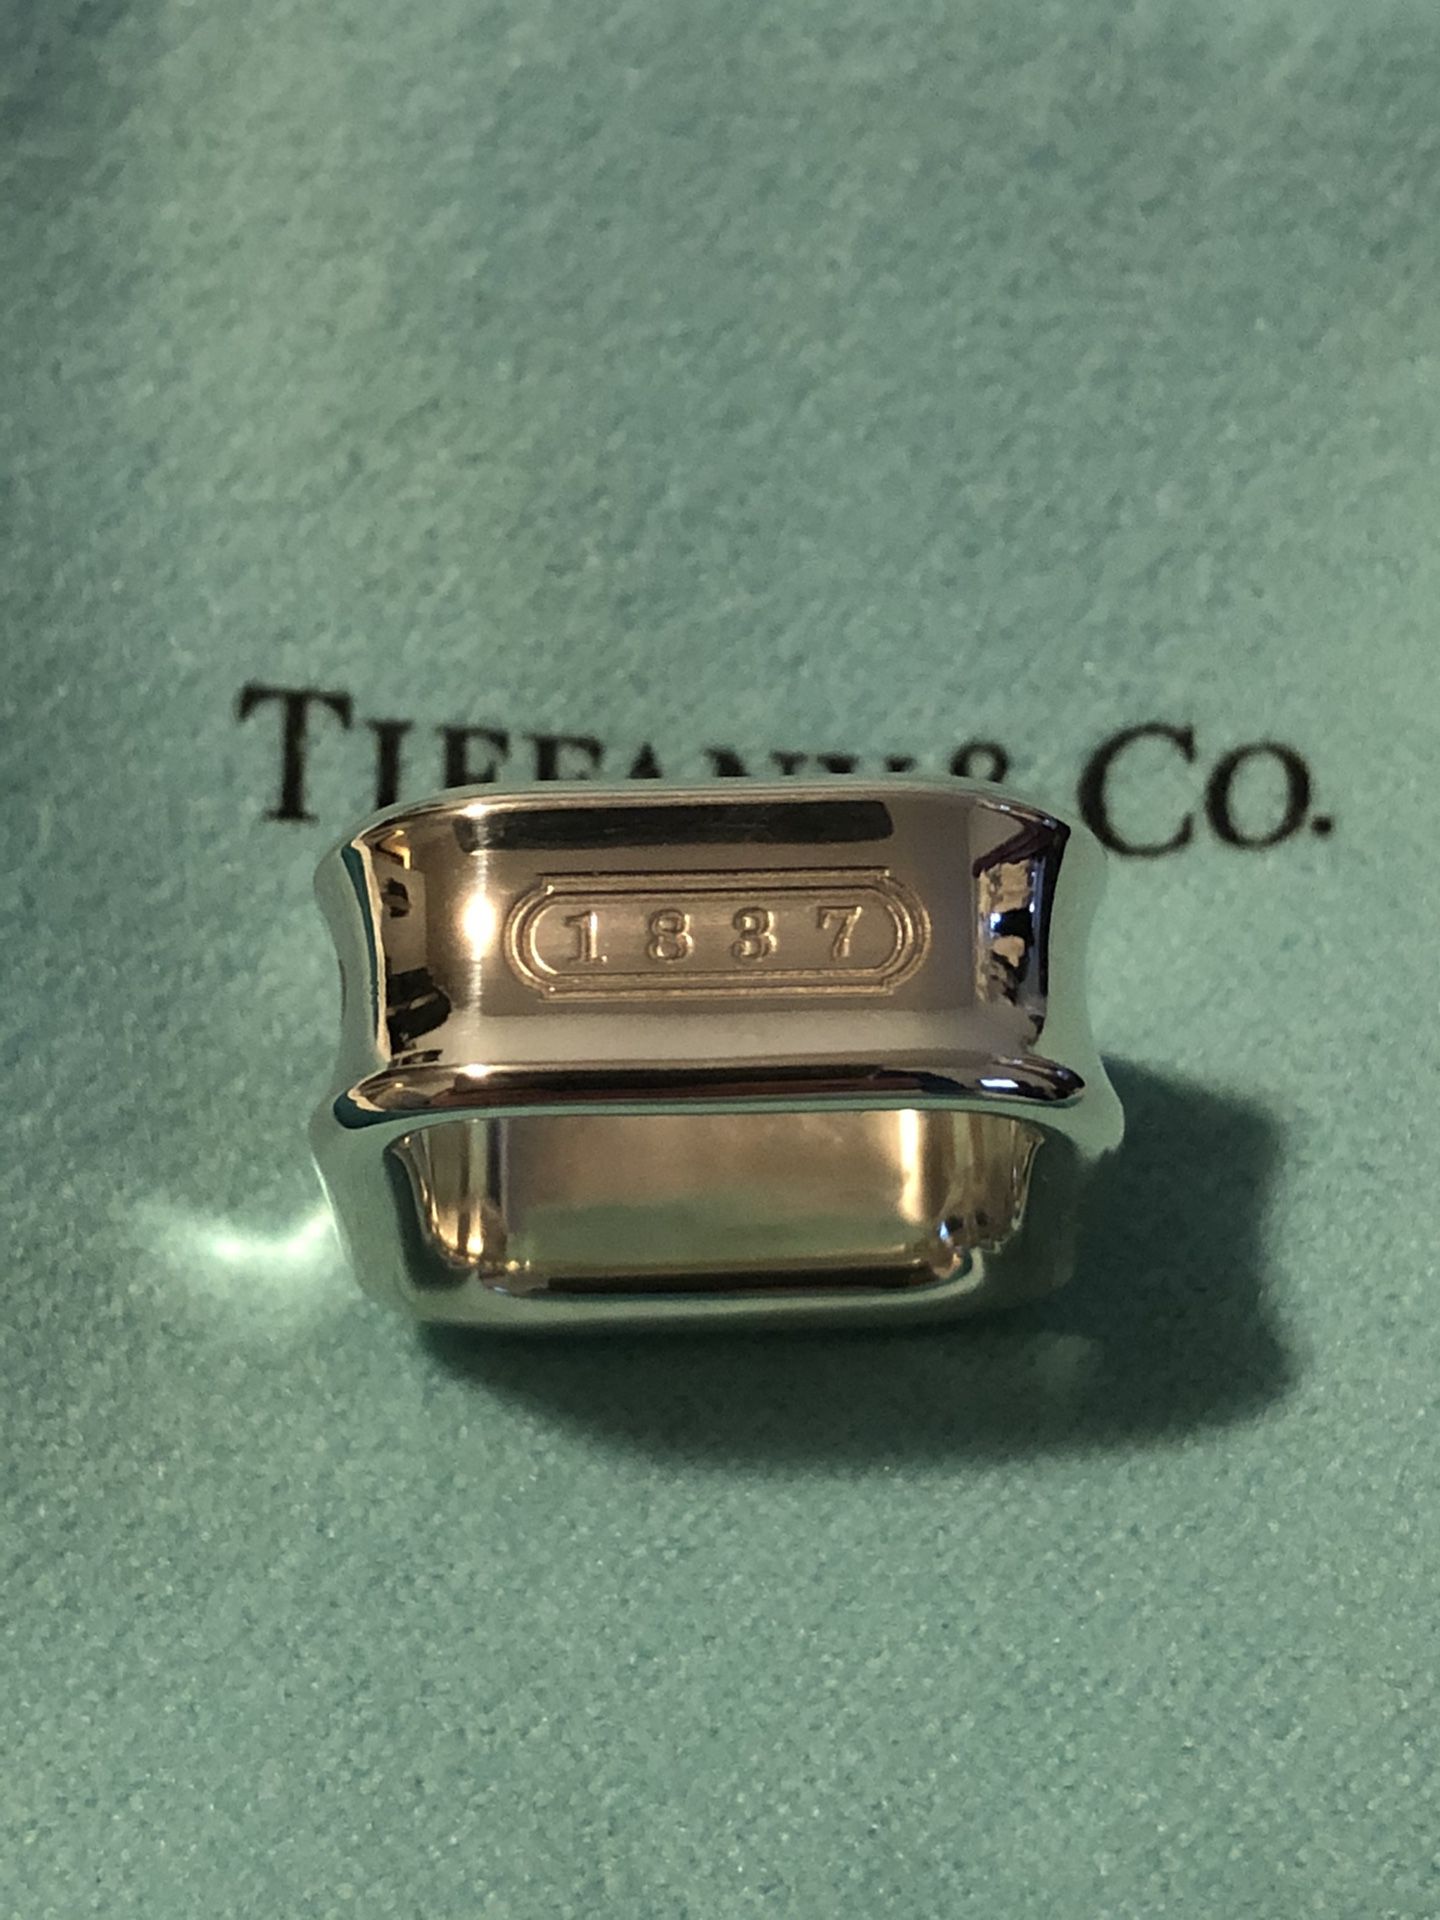 Authentic Tiffany & Co. 1837 cushion ring sterling silver